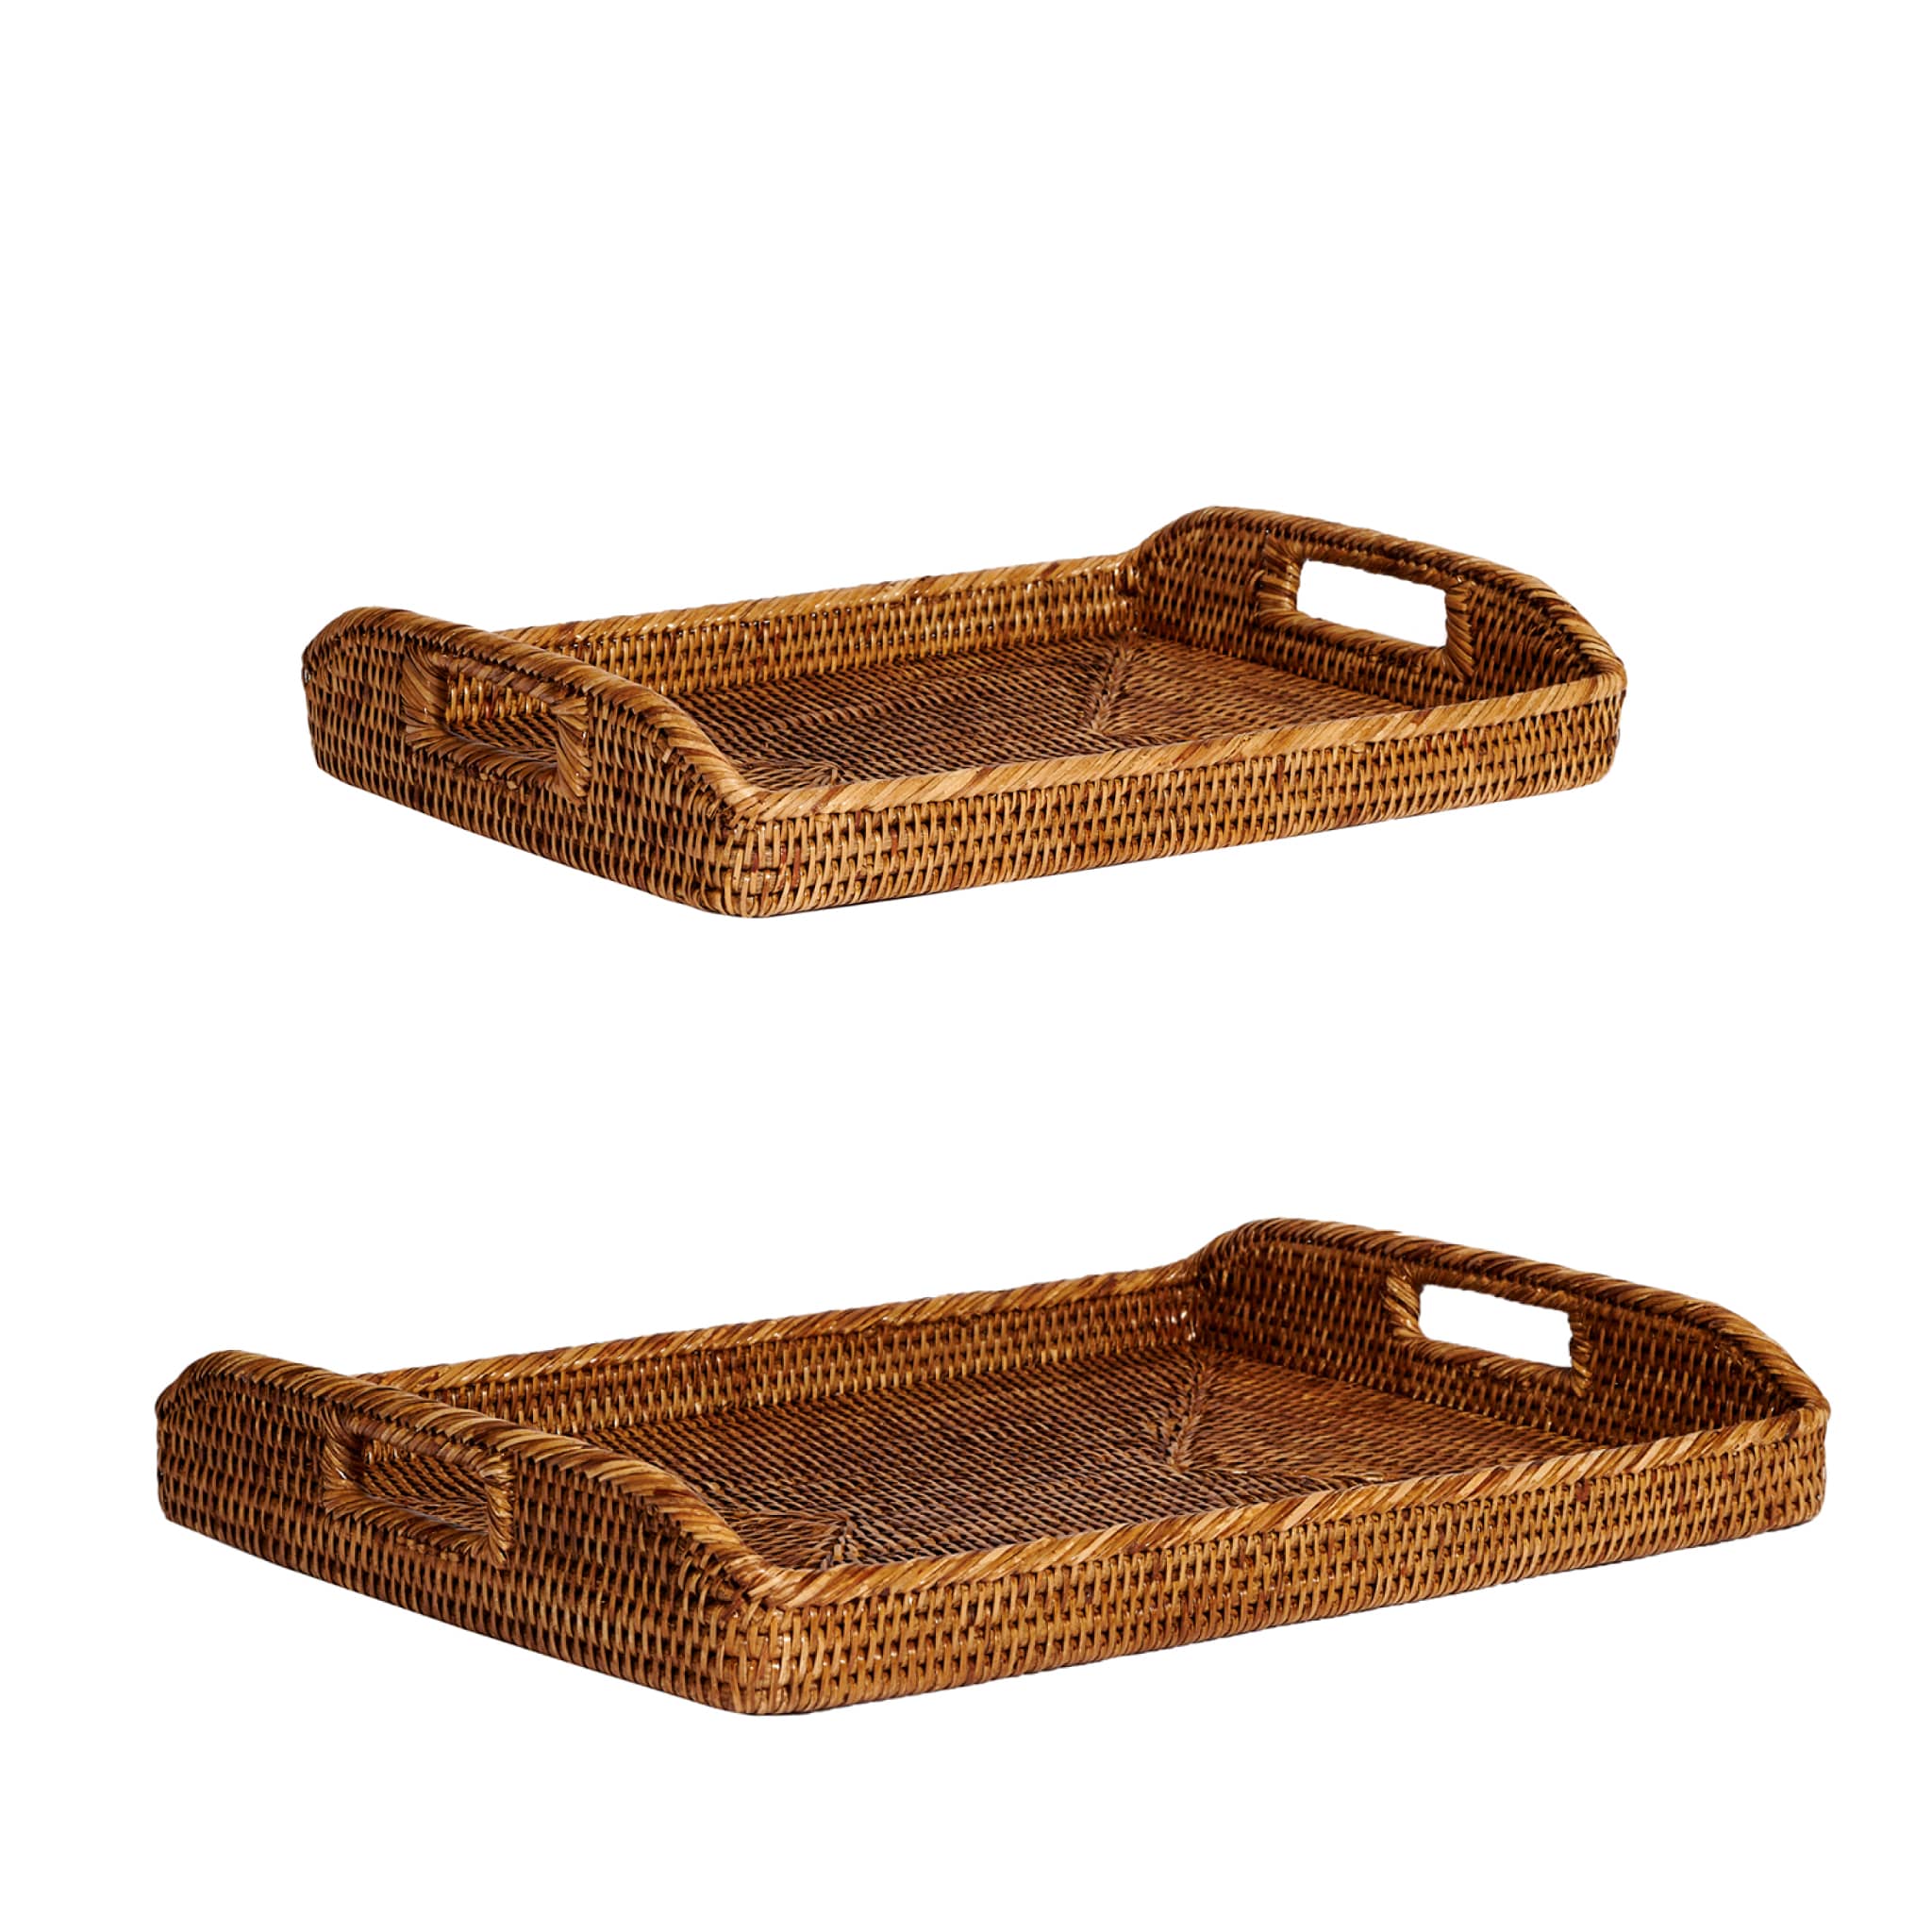 Village tray set in natural rattan, dim. 50x36 cm and 42x30 cm